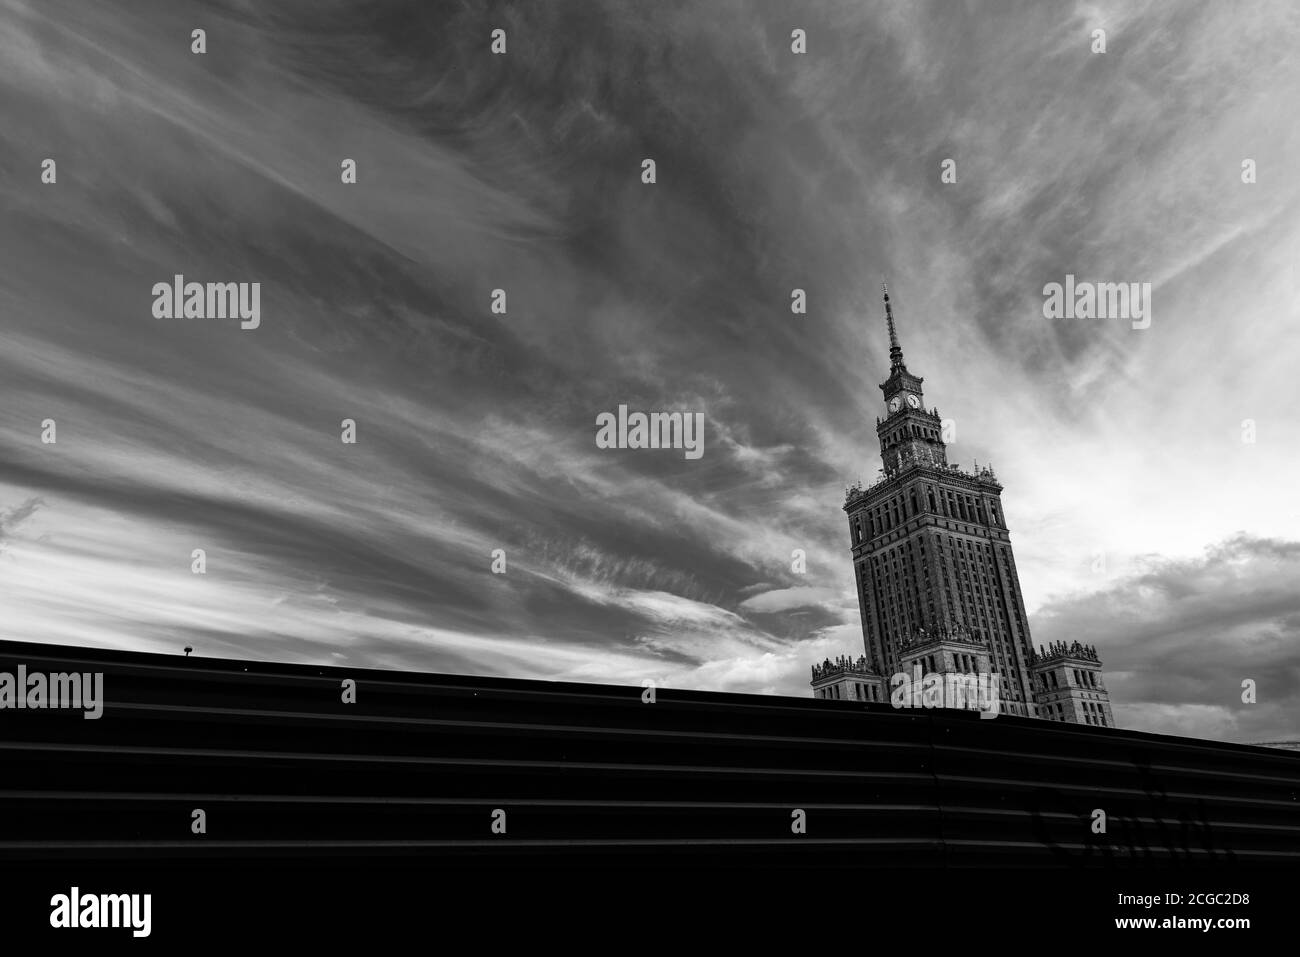 Exterior view of the Palace of Culture and Science building Warsaw, Poland was built in 1955. Stock Photo